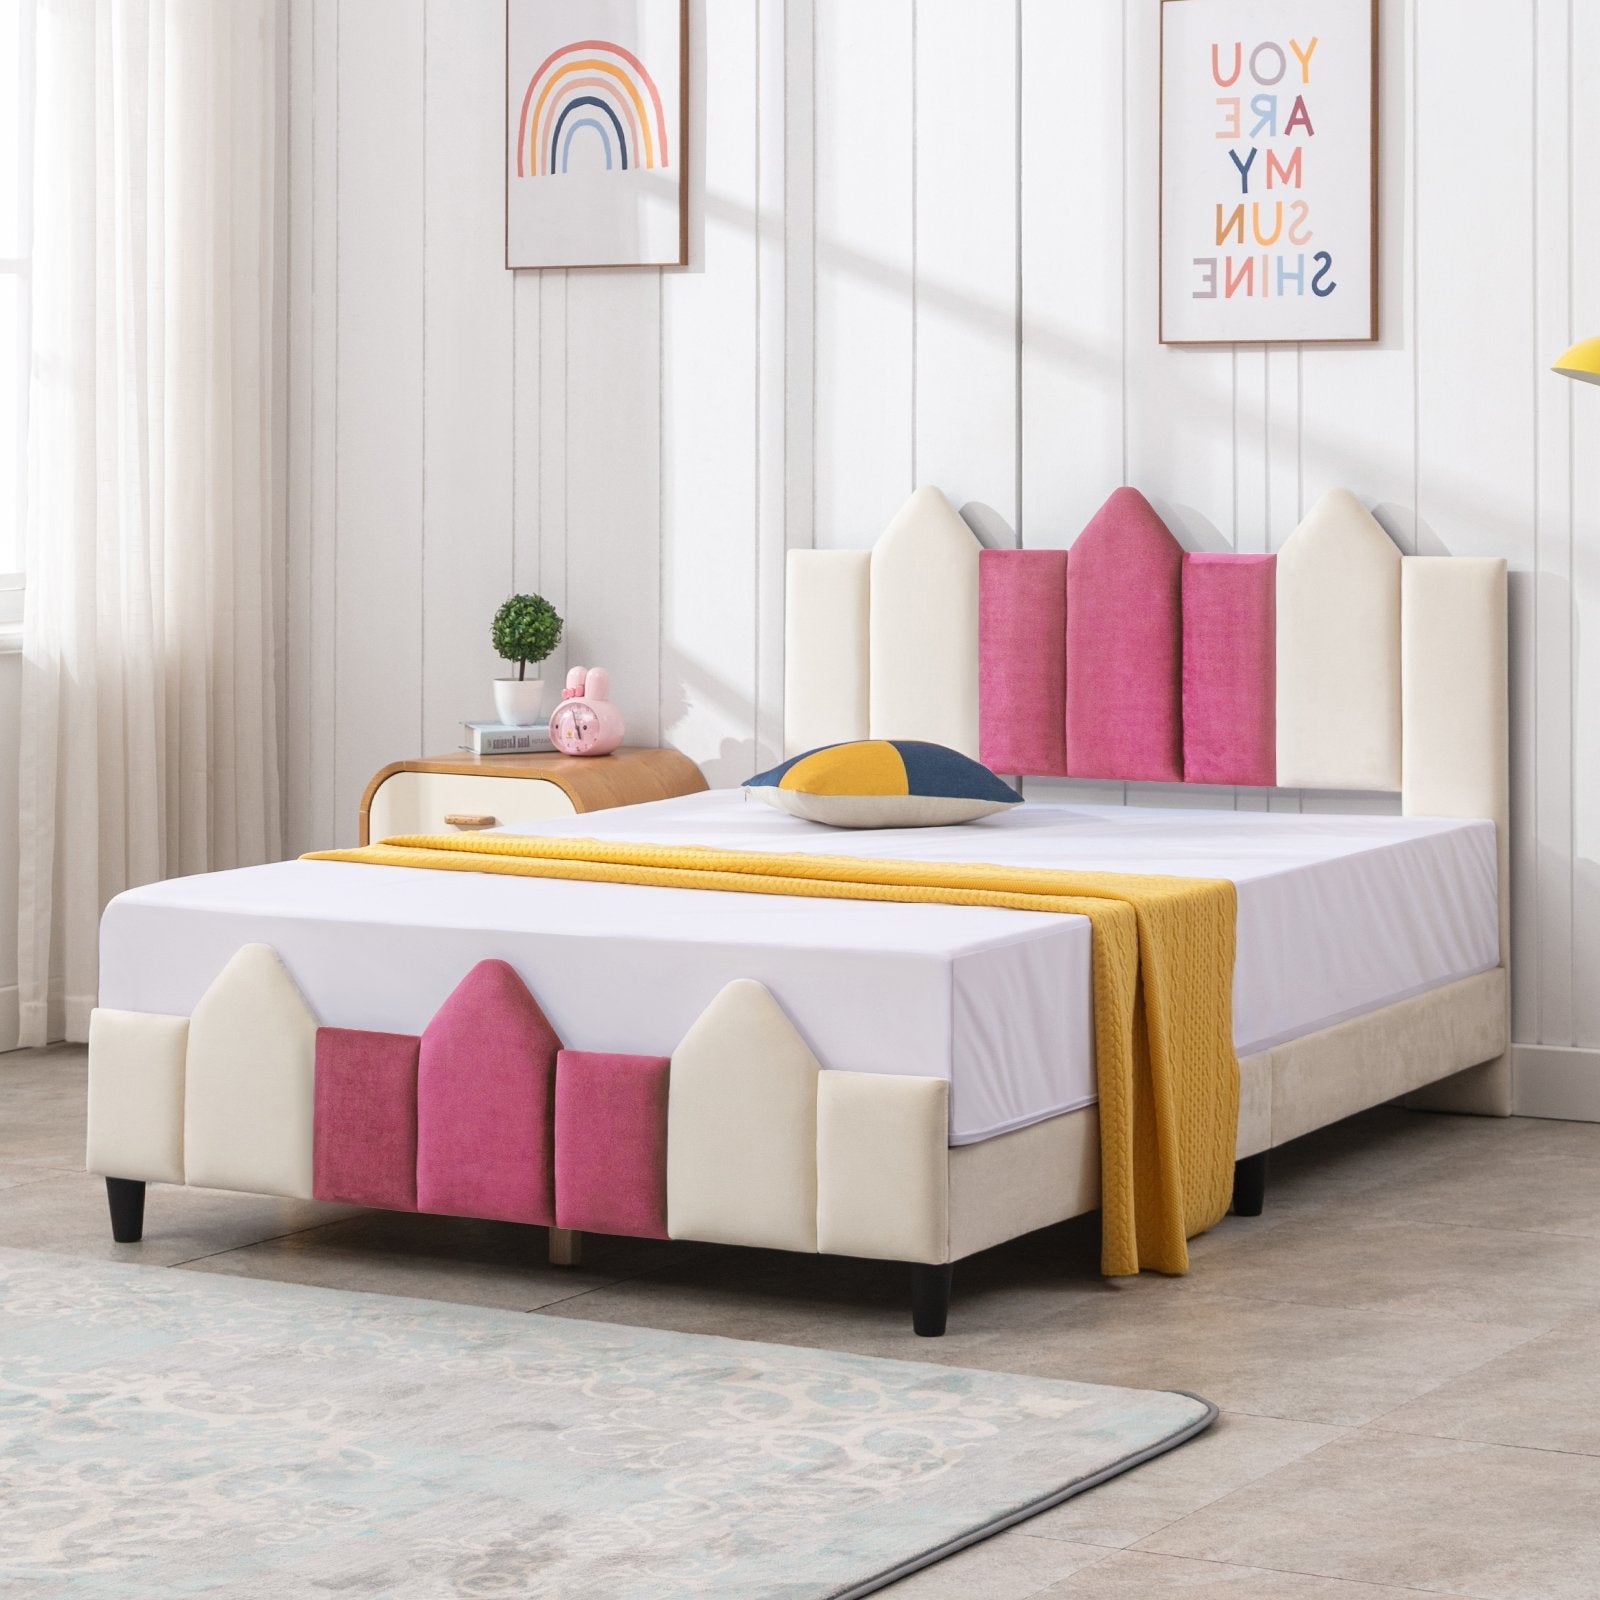 Kid's Bed | Upholstered Kids Bed Frame with Tuft Headboard and Footboard - Mjkonebed frame